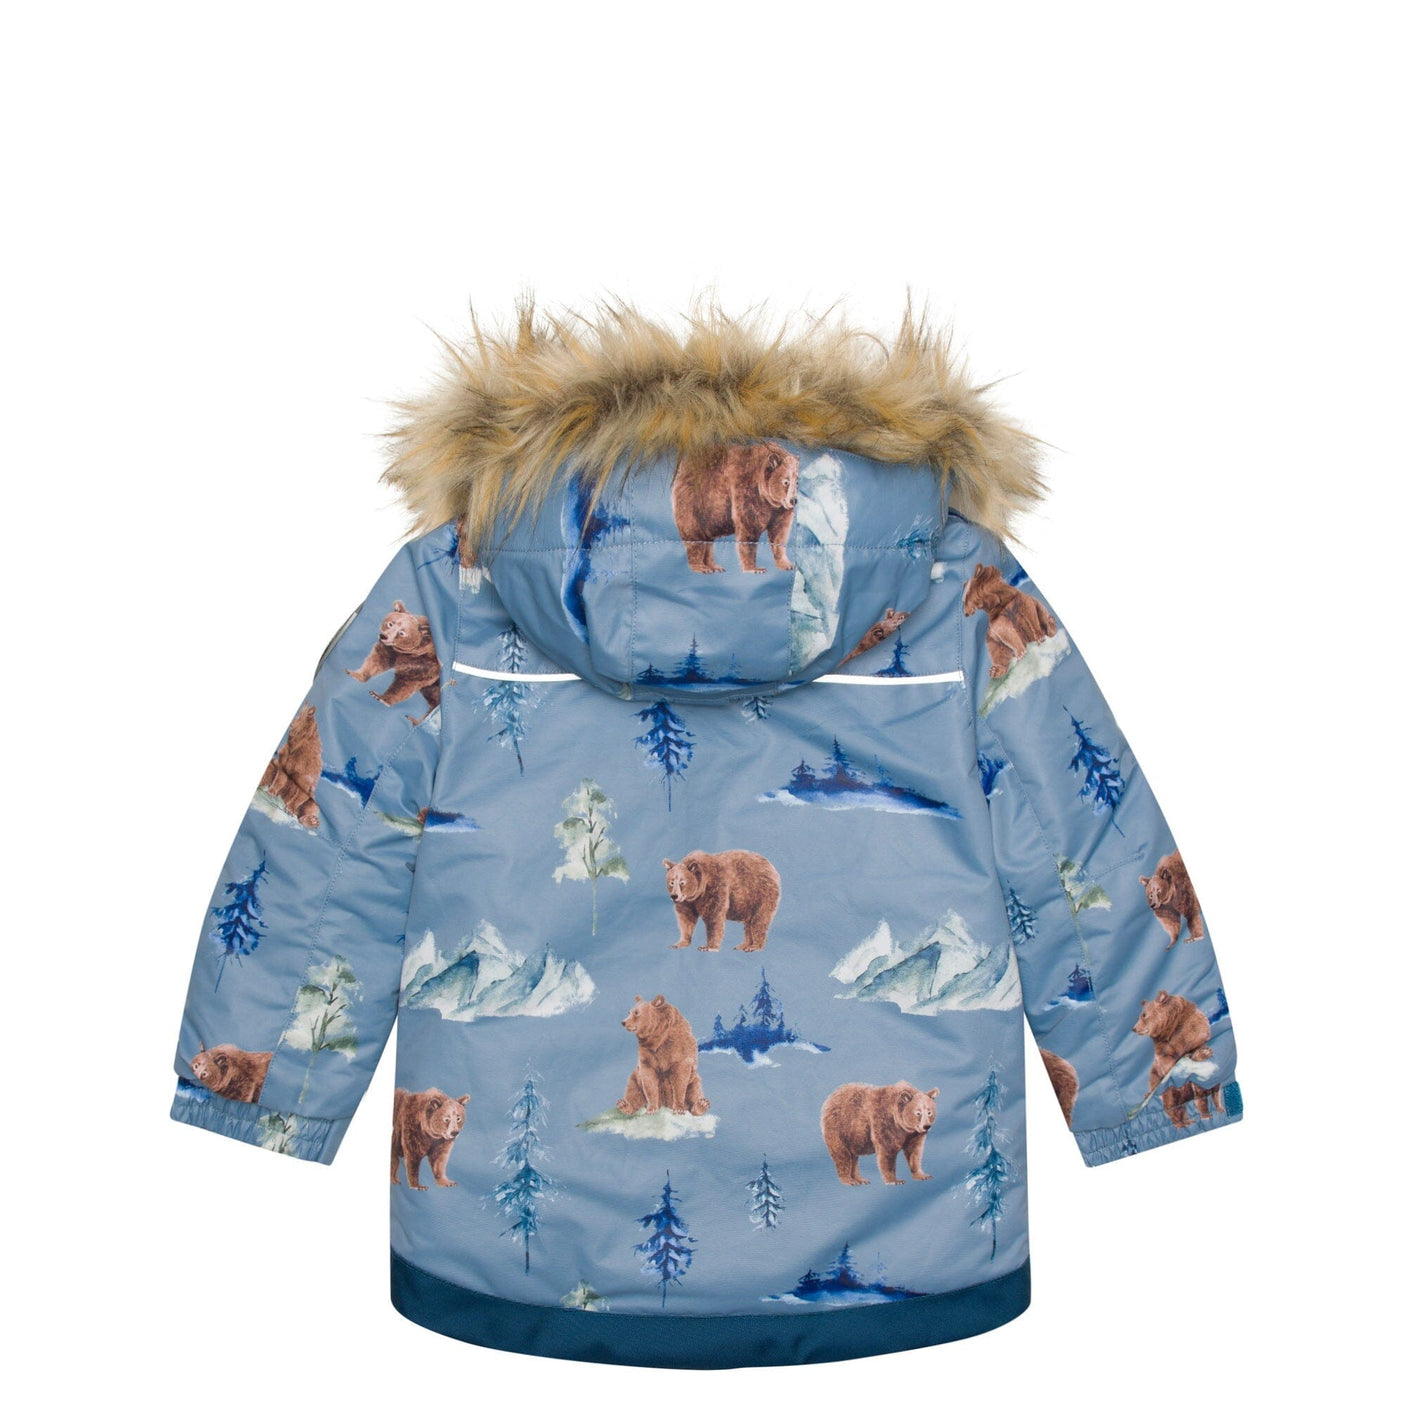 Two Piece Snowsuit Teal Blue With Bear Print-5